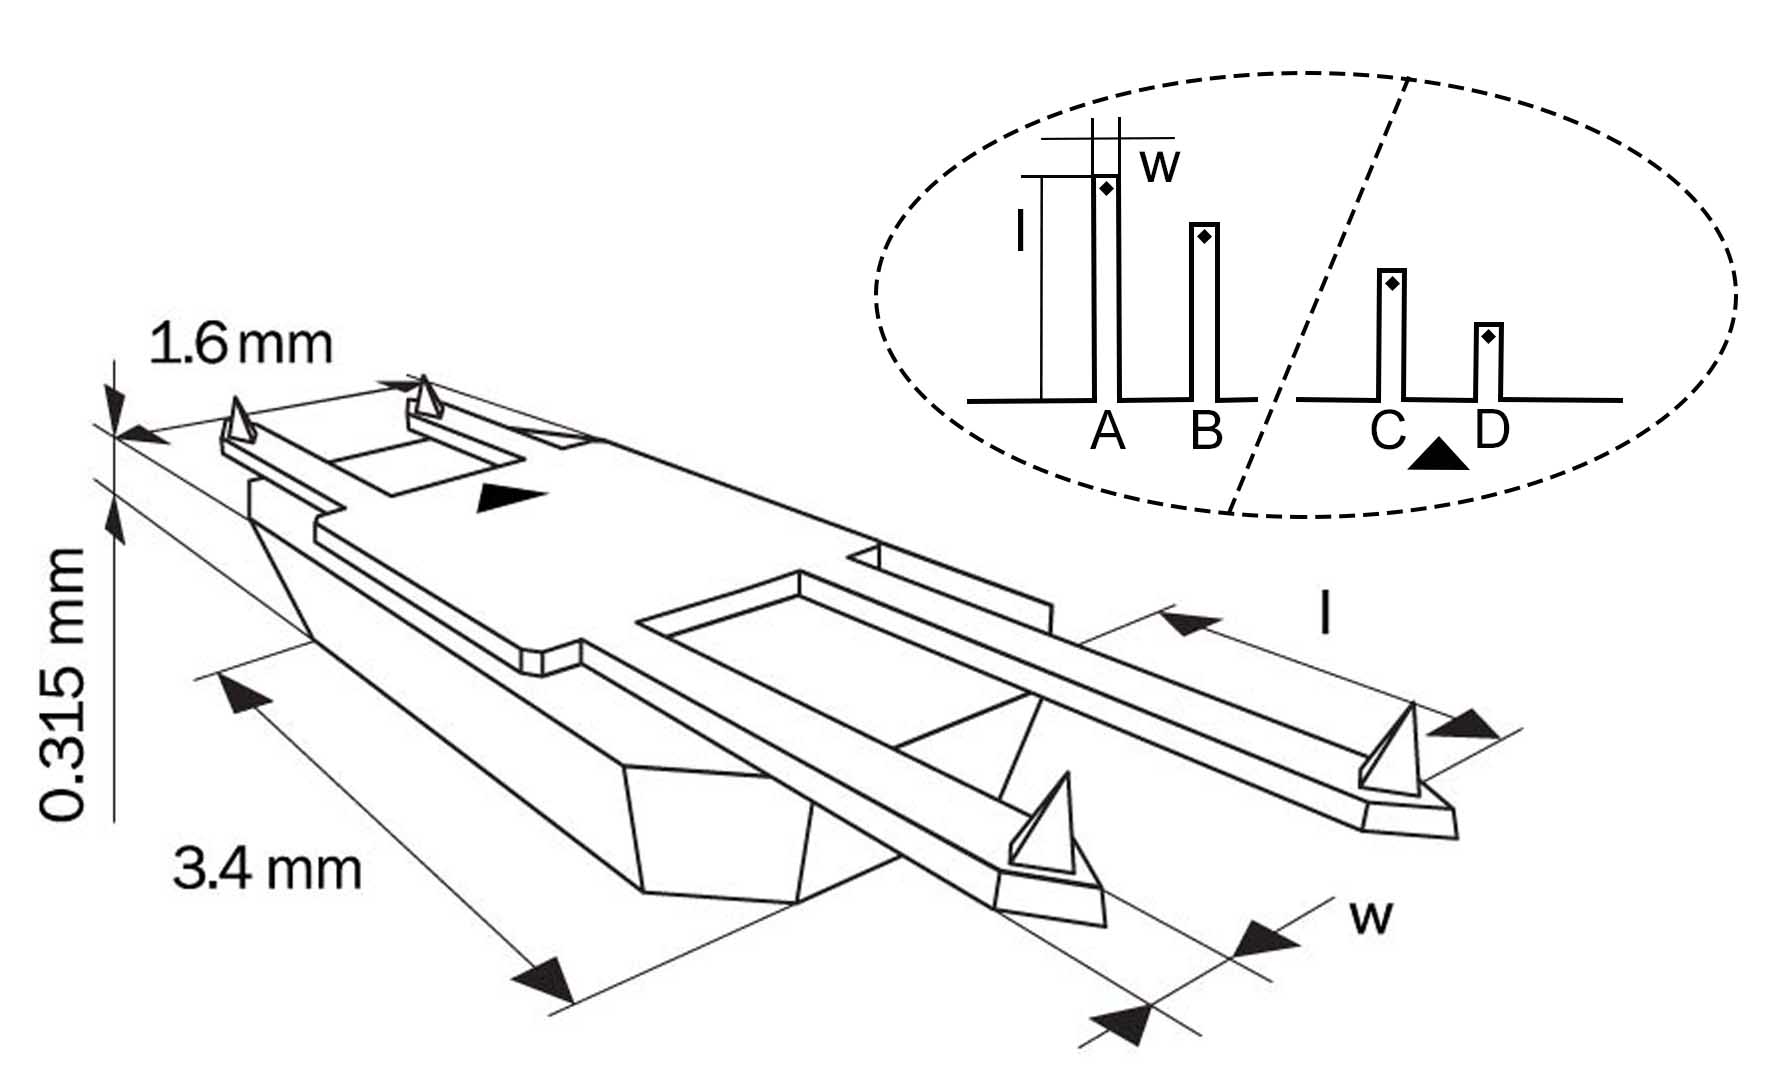 Schematic drawing of an AFM probe with four AFM cantilevers.